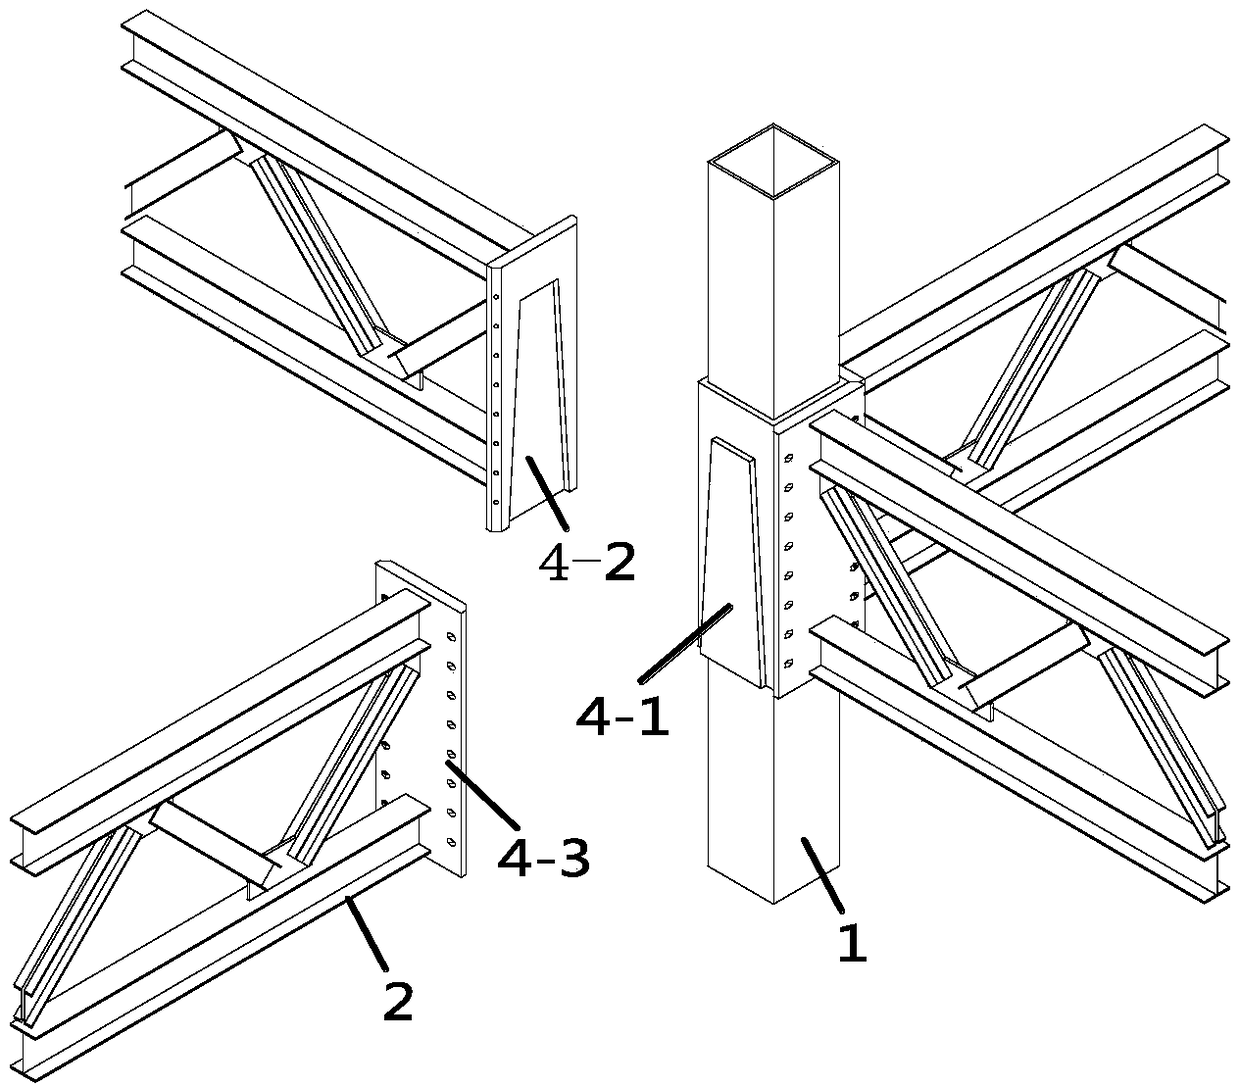 Multi-storey high-rise assembly type steel frame structure with replaceable open-web energy consumption segment